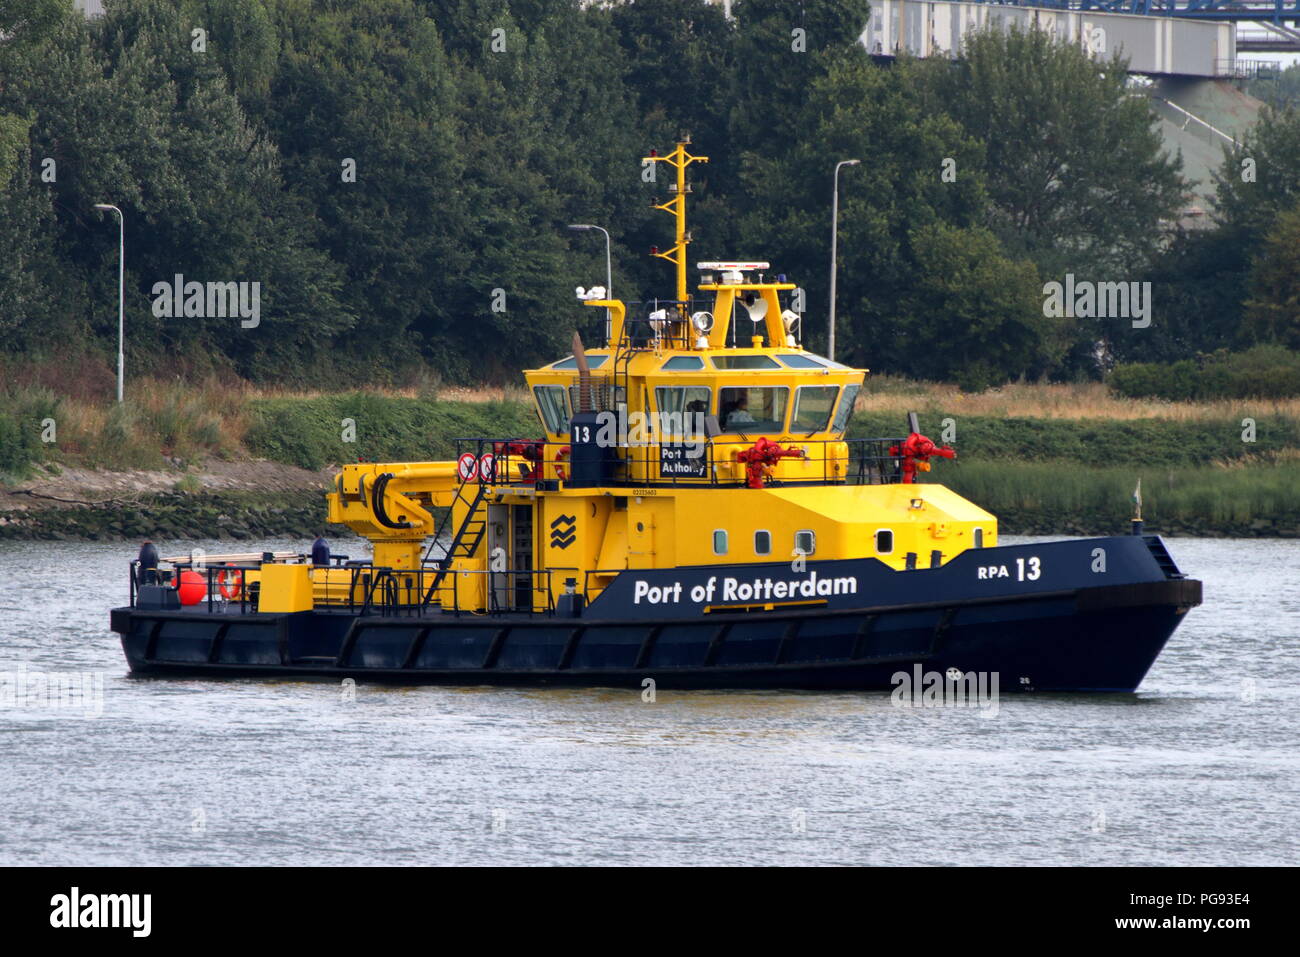 The patrol boat RPA 13 operates on 13 July 2018 in the port of Rotterdam. Stock Photo